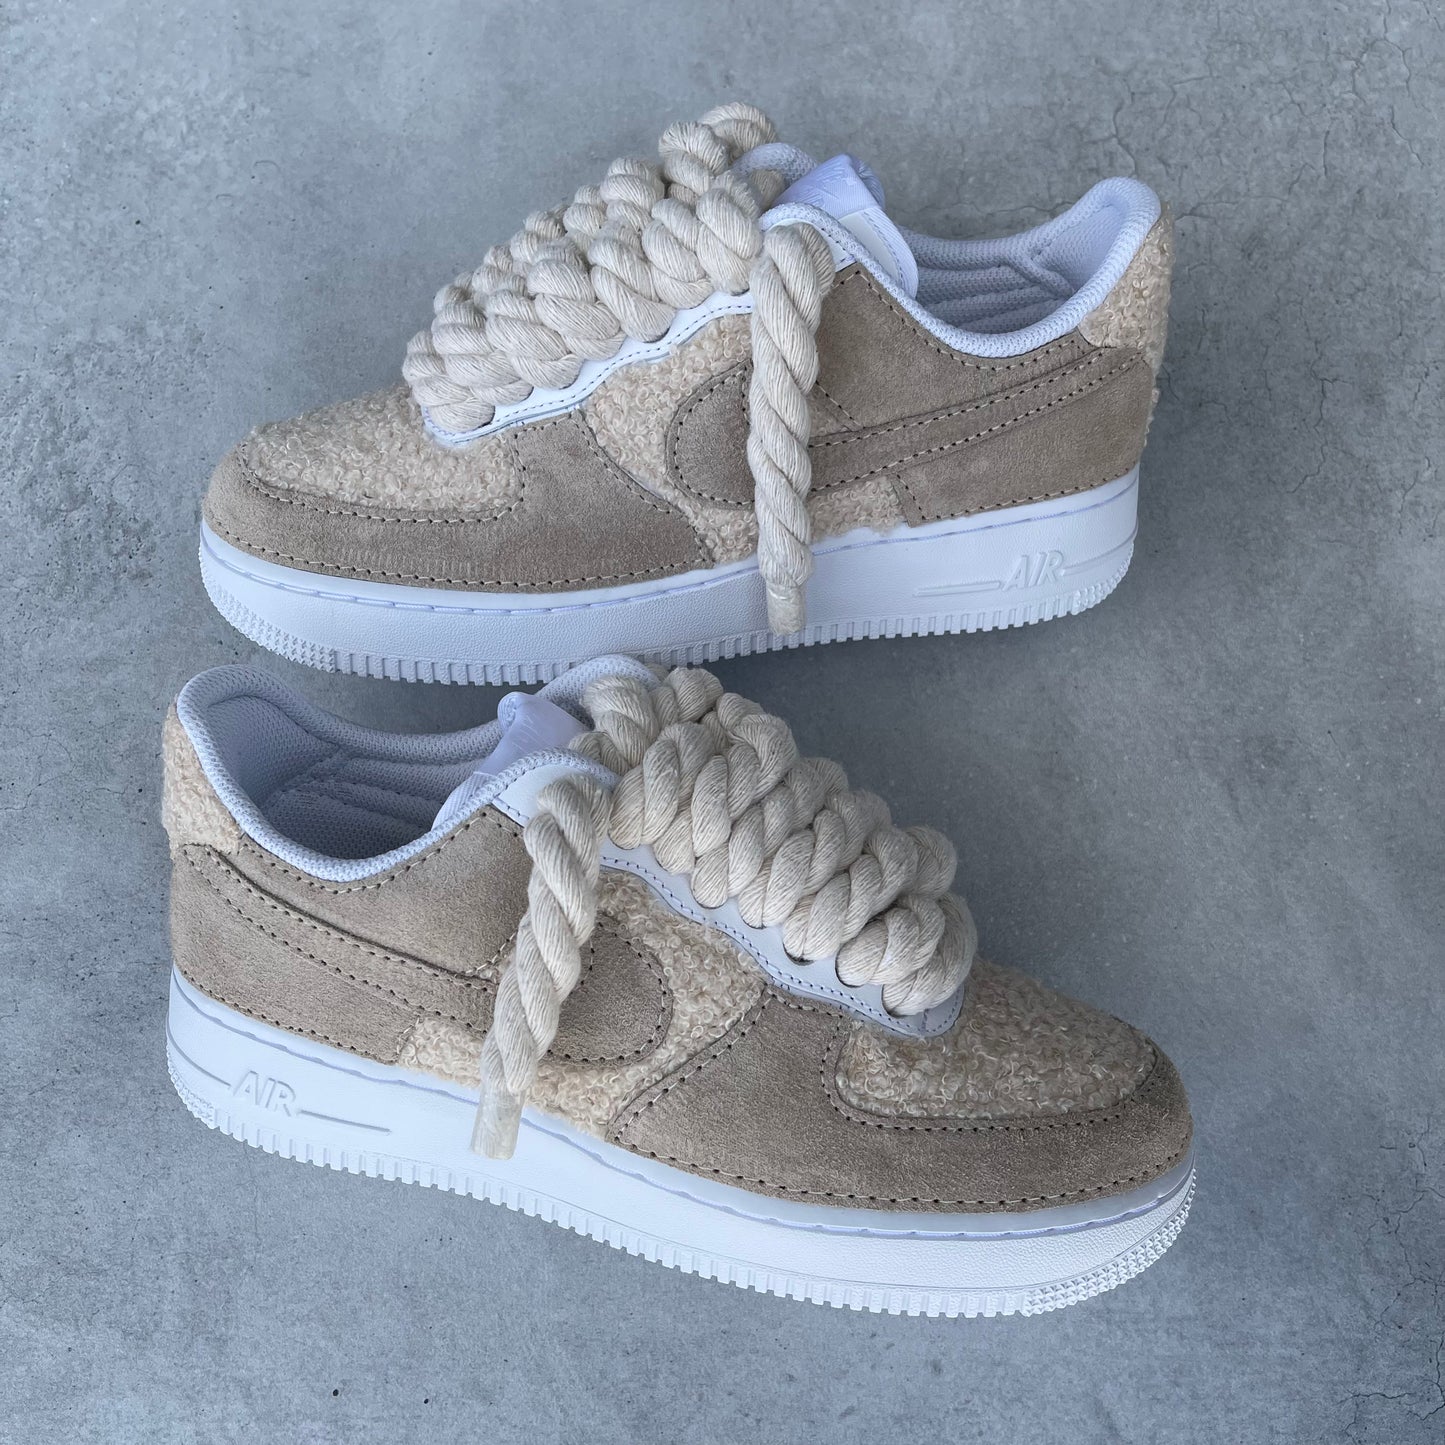 Custom AIR FORCE 1 - Full Suede/Teddy (rope laces)